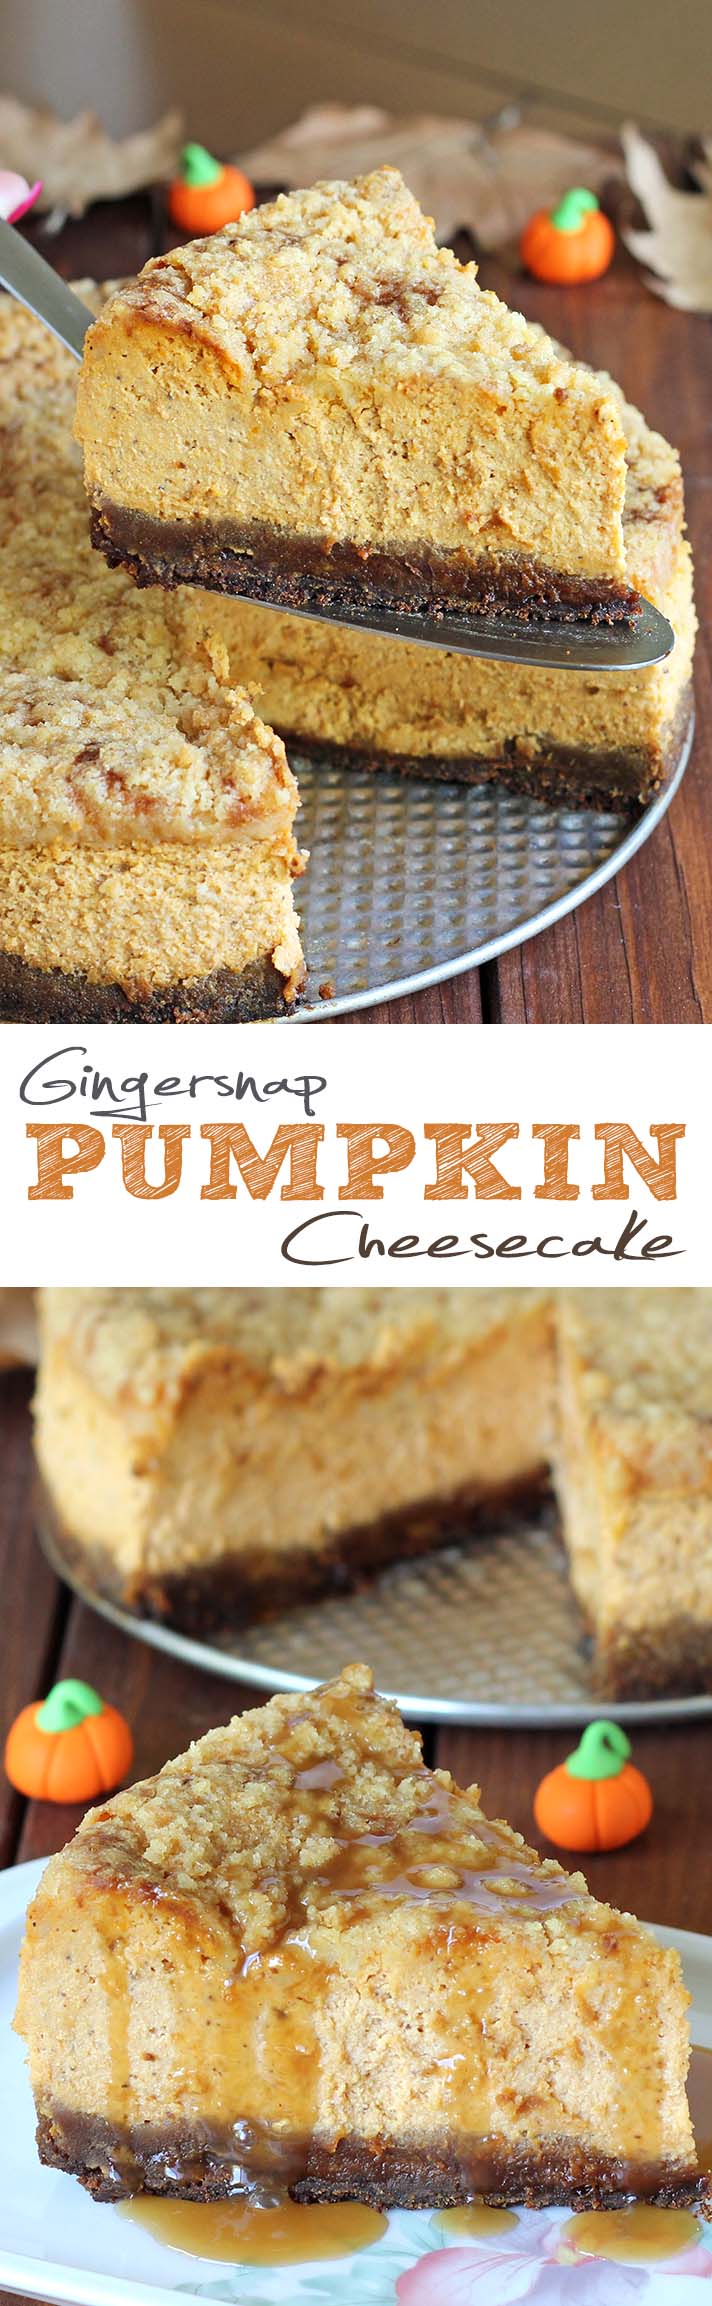 Pumpkin pie is always expected at Thanksgiving, but this year shake things up a bit and make Gingersnap Pumpkin Cheesecake instead. 